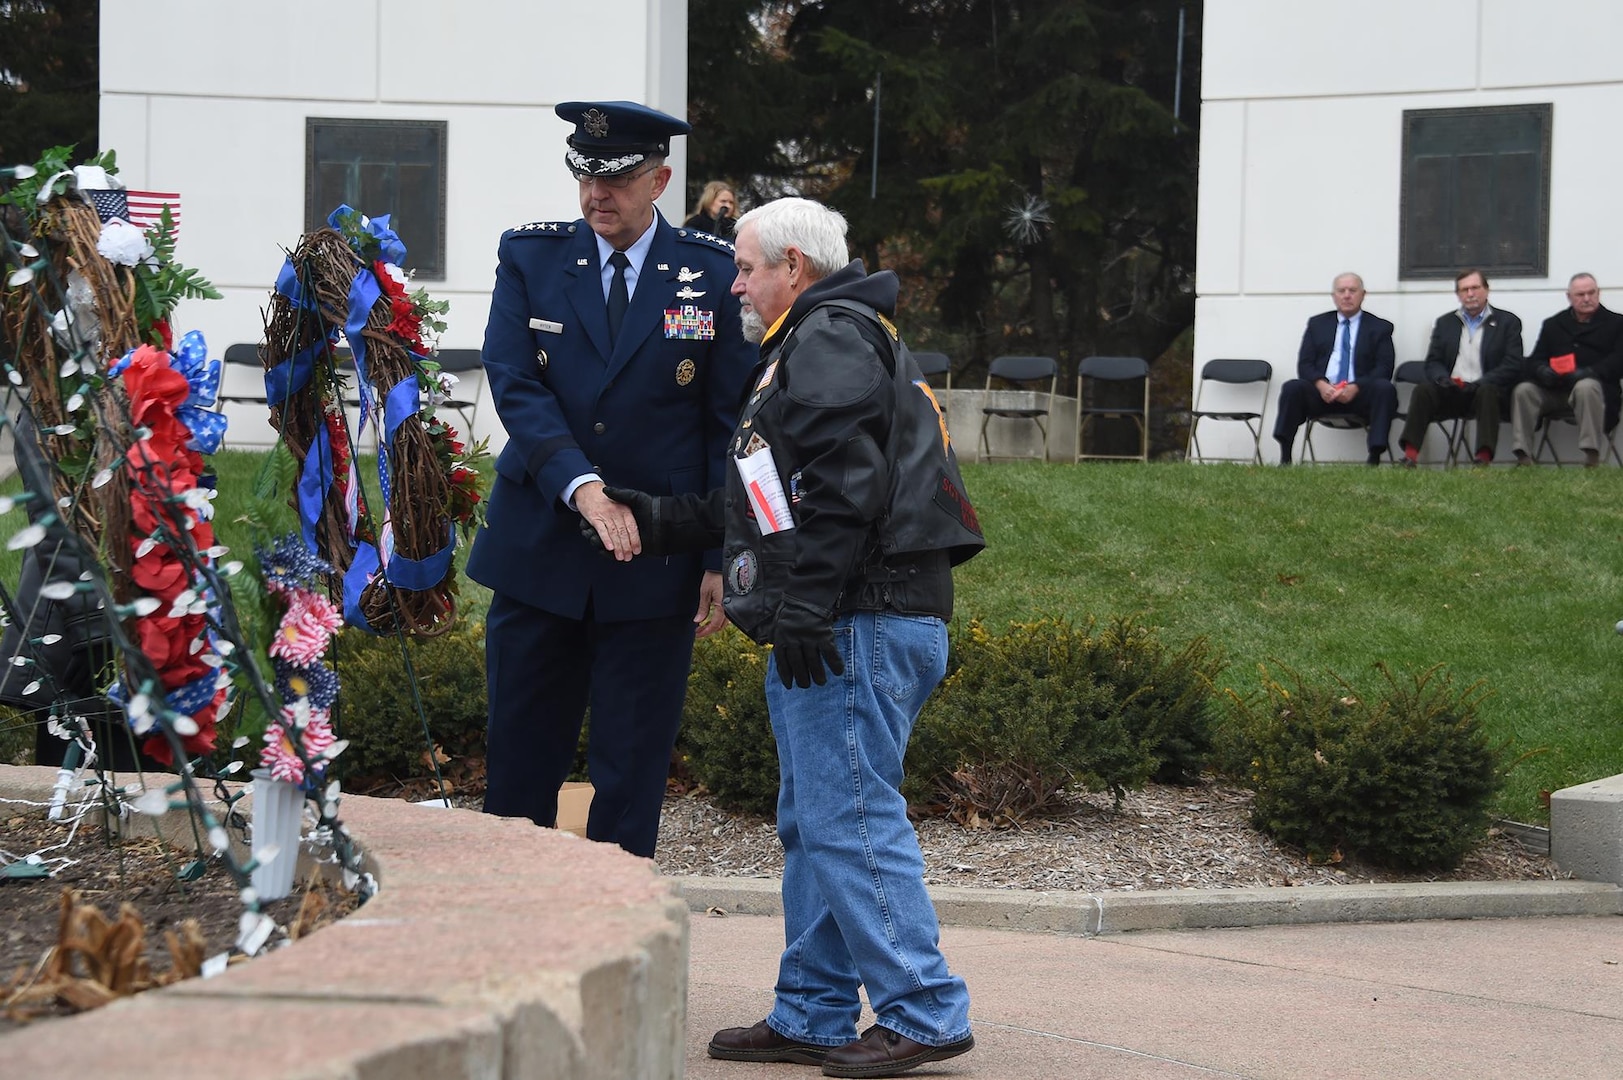 U.S. Air Force Gen. John Hyten, commander of U.S. Strategic Command, and Lonnie Ford, a Gold Star father, shake hands after placing a wreath to honor the sacrifice of American veterans during a Veterans Day ceremony at Memorial Park in Omaha, Neb., Nov. 11, 2017. Ford’s son, U.S. Army Sgt. Joshua Ford, was killed July 31, 2000, during combat operations in Al Numaniyah, Iraq. More than 200 people attended the ceremony to recognize the service of American veterans and their families.